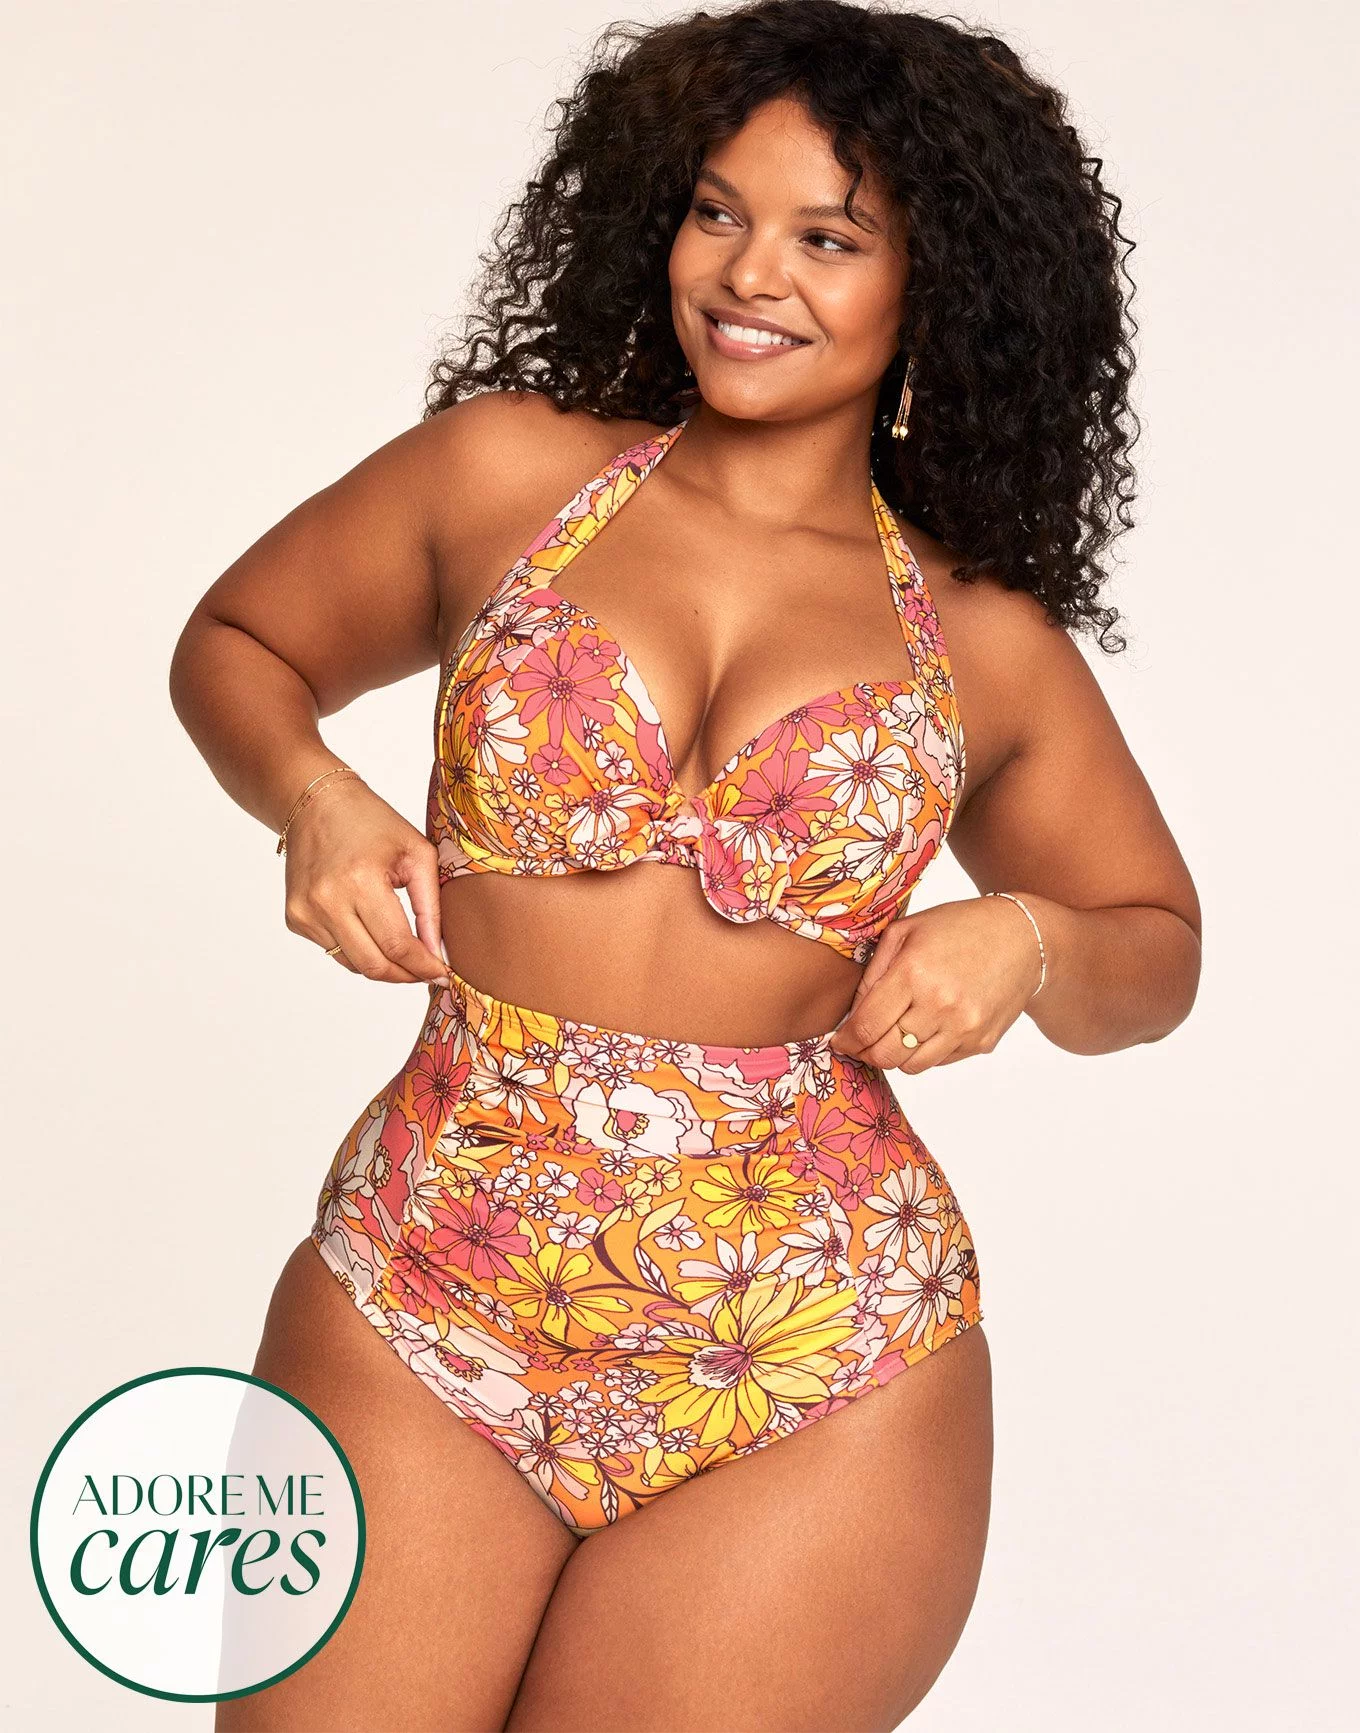 Swimwear / Bathing Suit from Blooming Jelly for Women in Pink